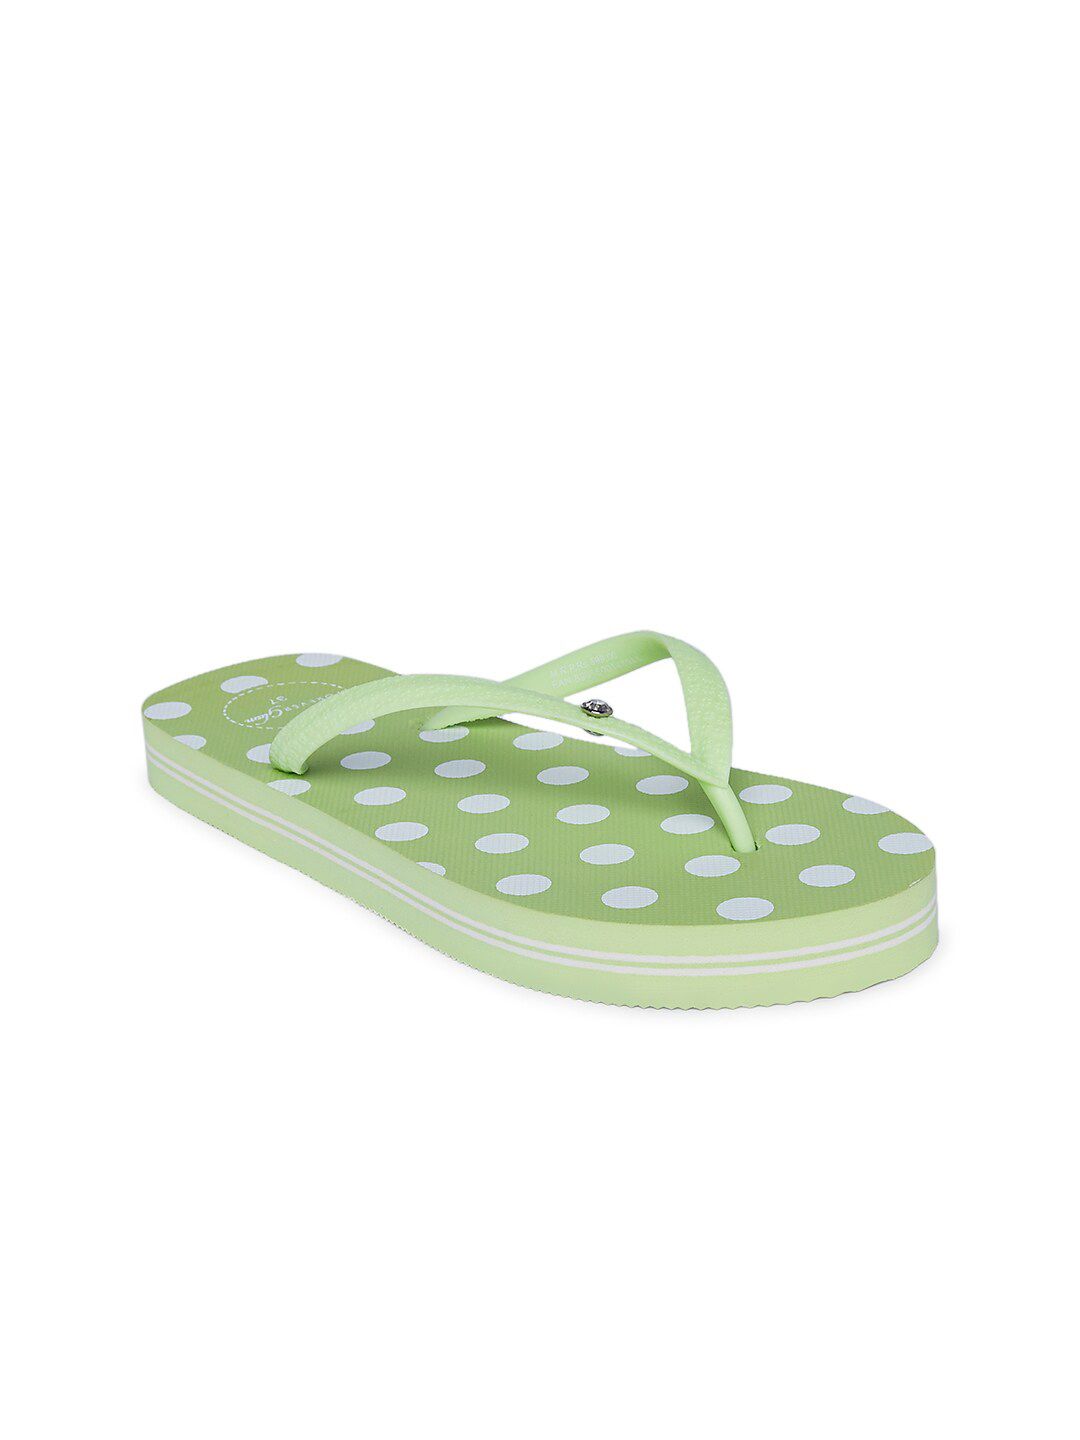 Forever Glam by Pantaloons Women Green & White Printed Thong Flip-Flops Price in India